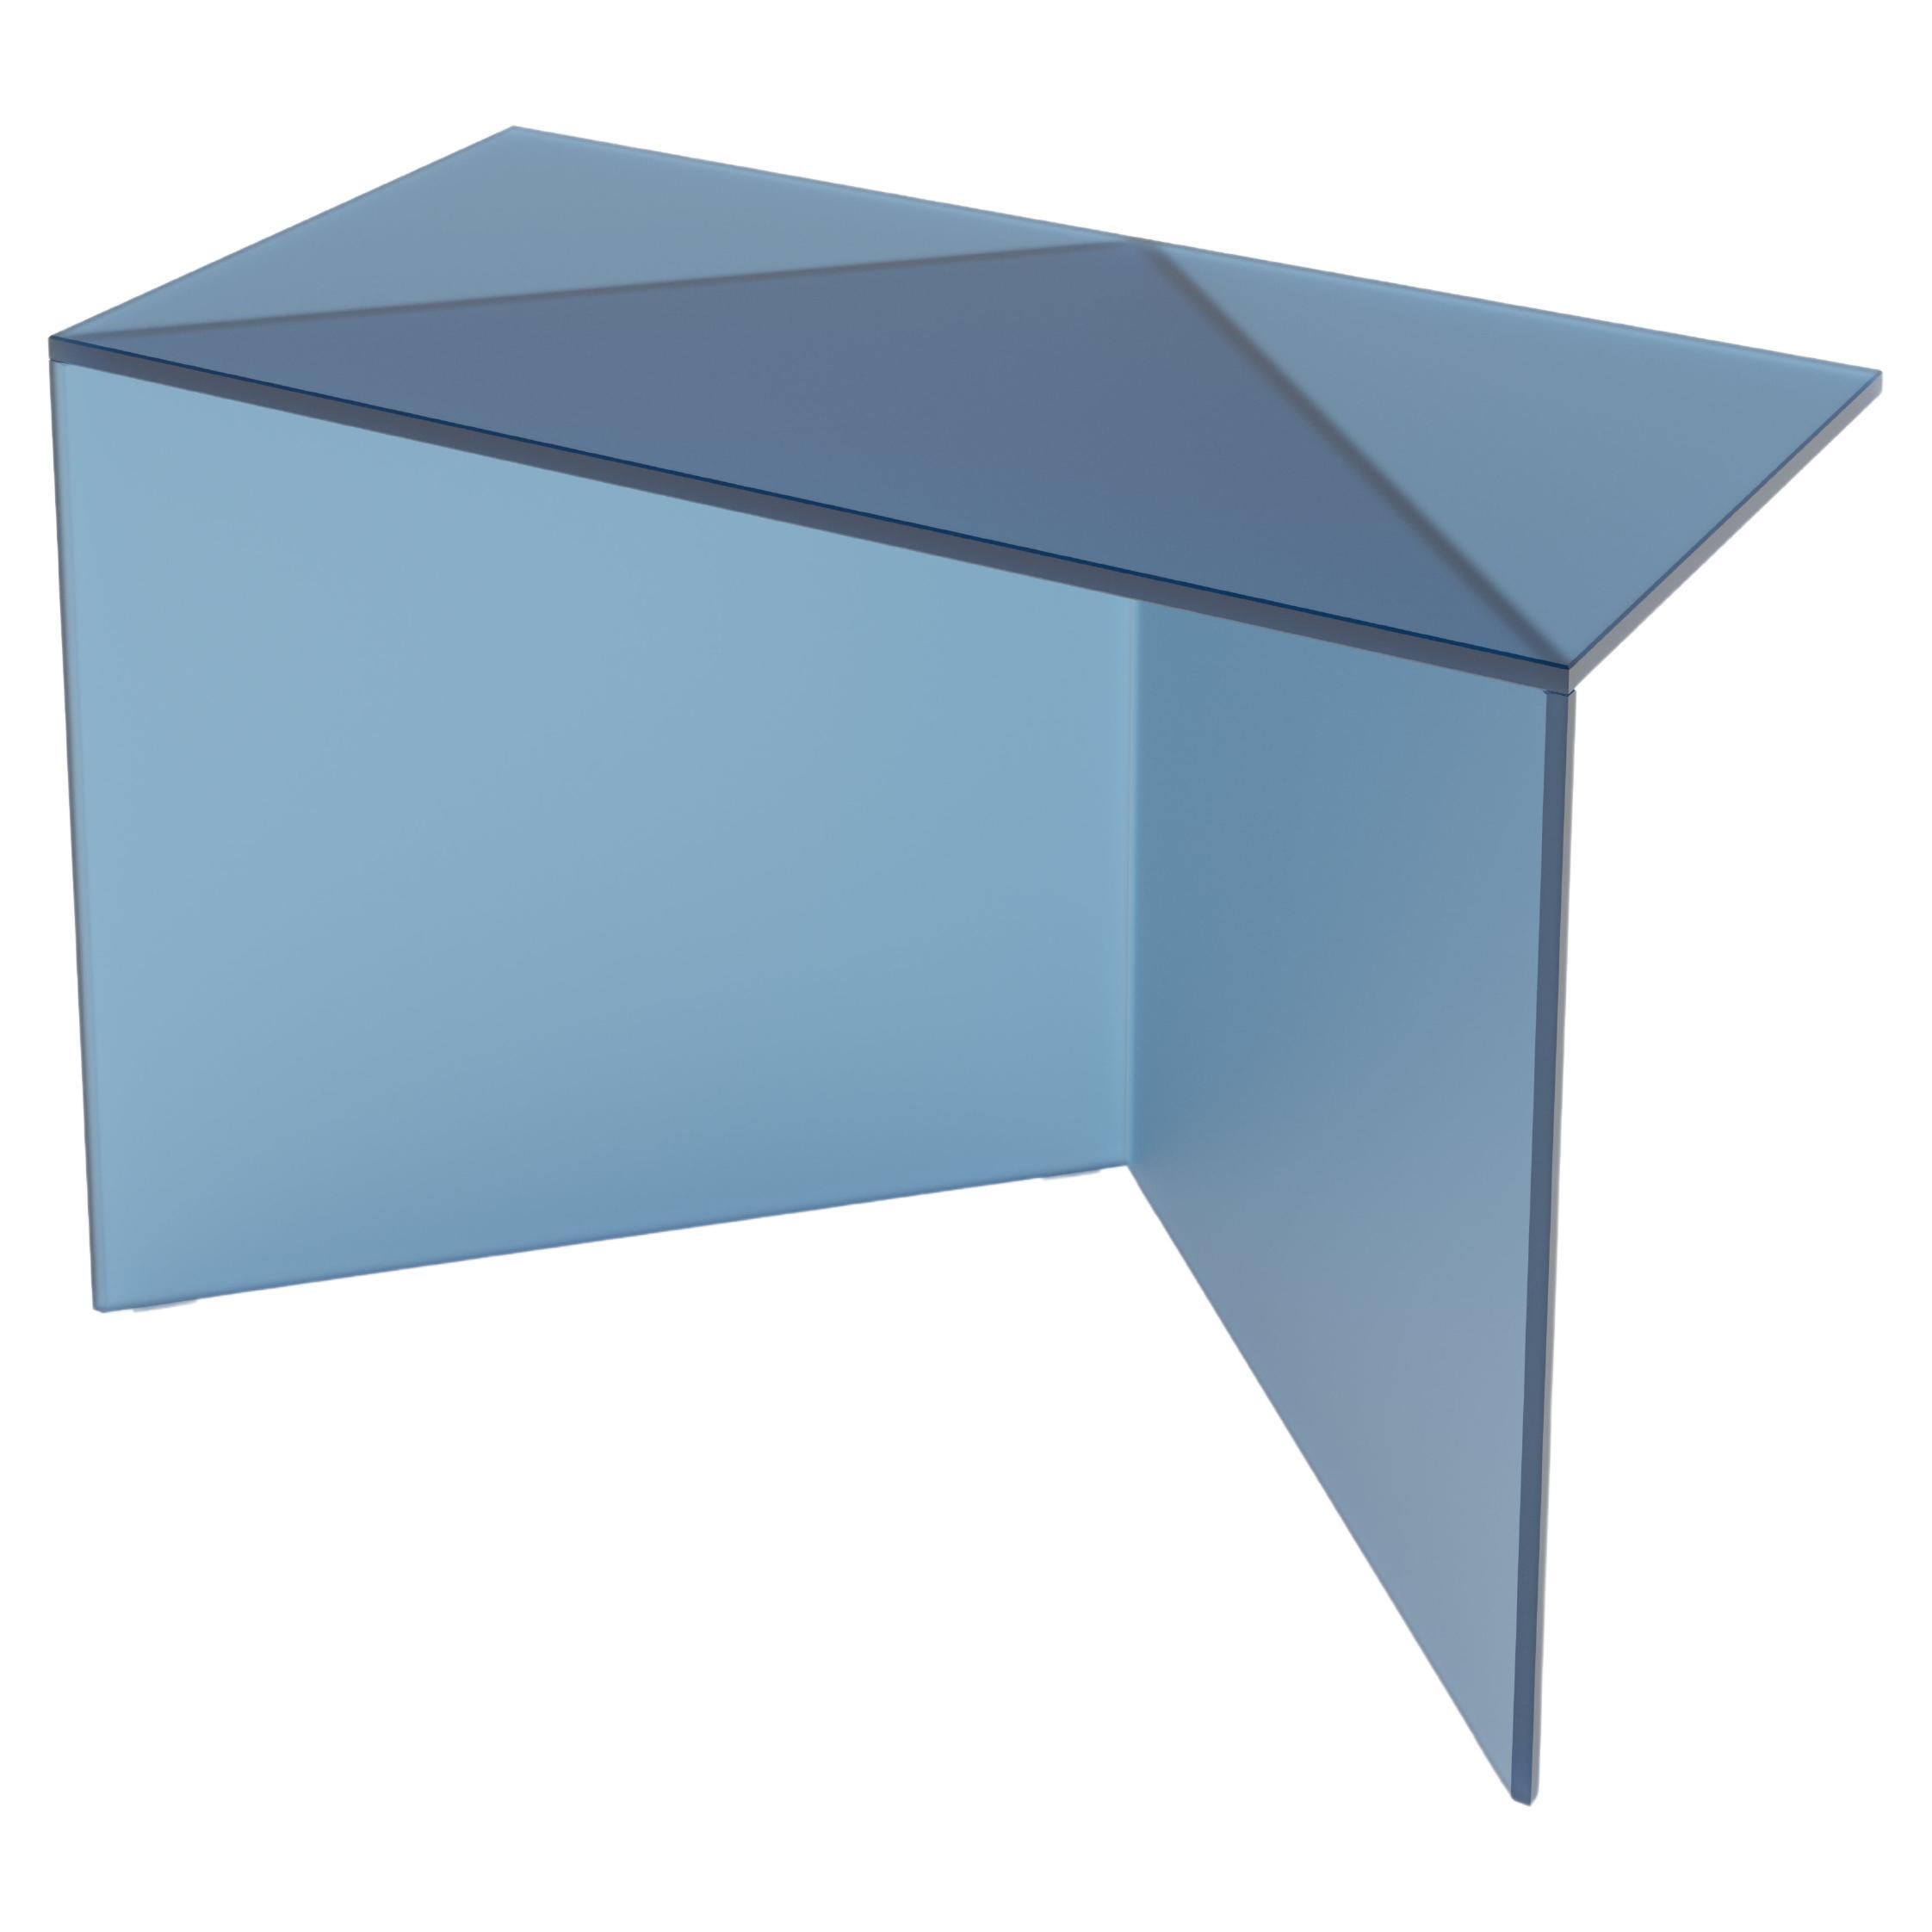 Blue Satin Glass Poly Square Coffee Table by Sebastian Scherer